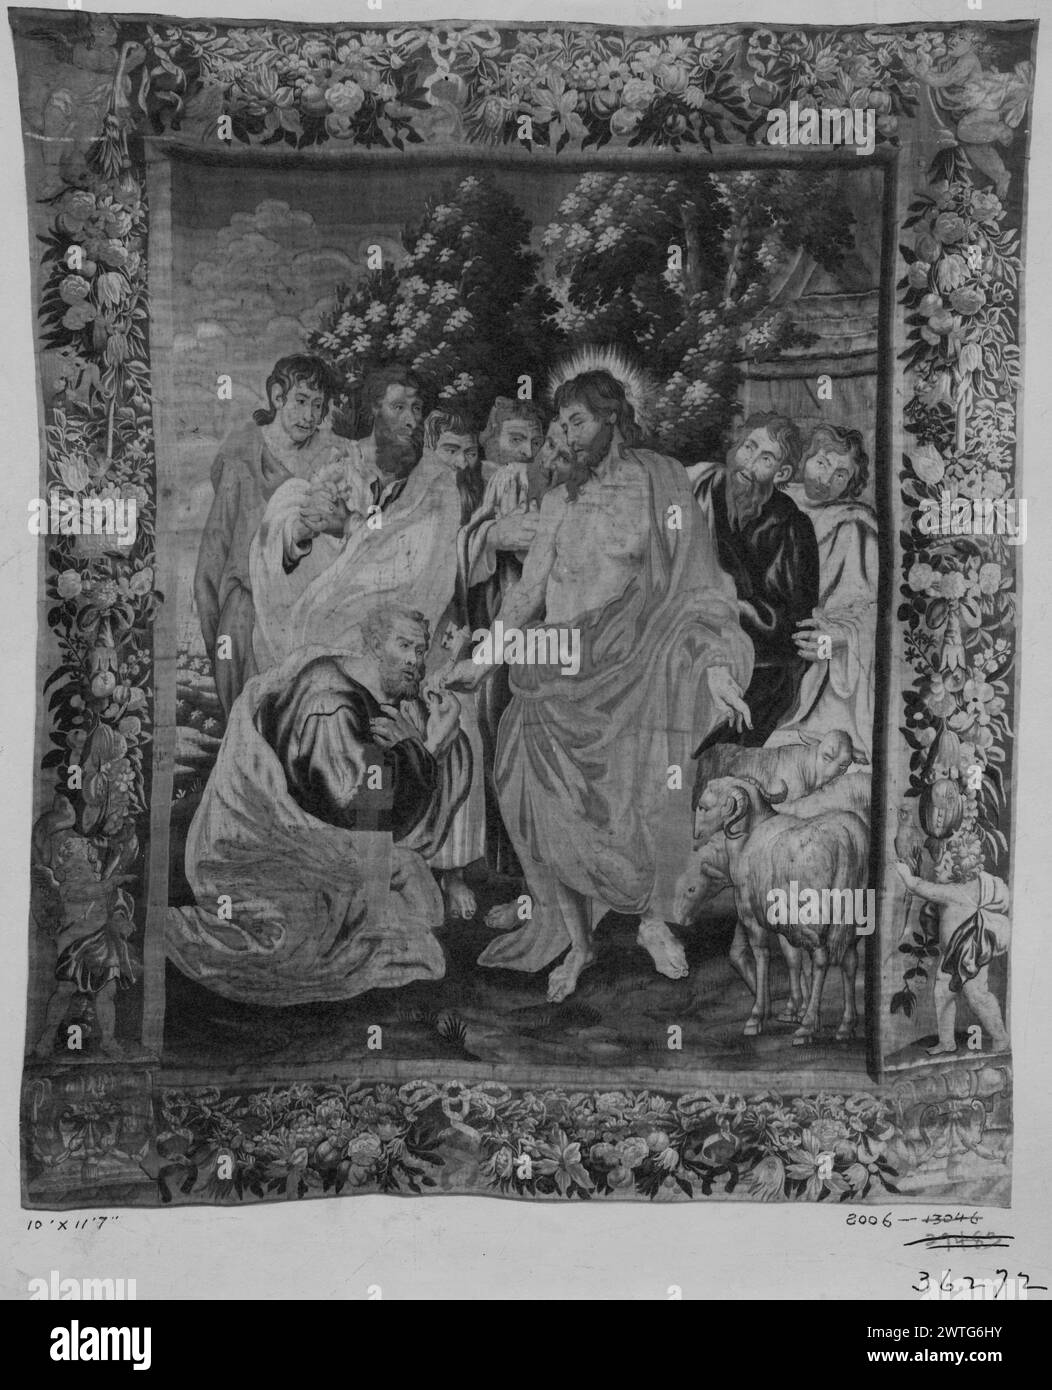 Christ gives keys of heaven to St. Peter. Raphael (Italian, 1483-1520) (designed after) [painter] c. 1650-1670 Tapestry Dimensions: H 11'7 x W 10' Tapestry Materials/Techniques: unknown Culture: Flemish Weaving Center: Brussels Ownership History: French & Co. purchased from Mrs. Adrienne H. Joline, received 9/15/1924, invoiced [1]/19/1925; sold to G. C. Booth 7/26/1939. Christ, having just given kneeling Peter key to heaven, stands with flock of lambs; group of apostles surround Peter (John 21:15-17) (BRD) garlands of flowers & fruit tied with ribbons; putti near each corner This panel is a pa Stock Photo